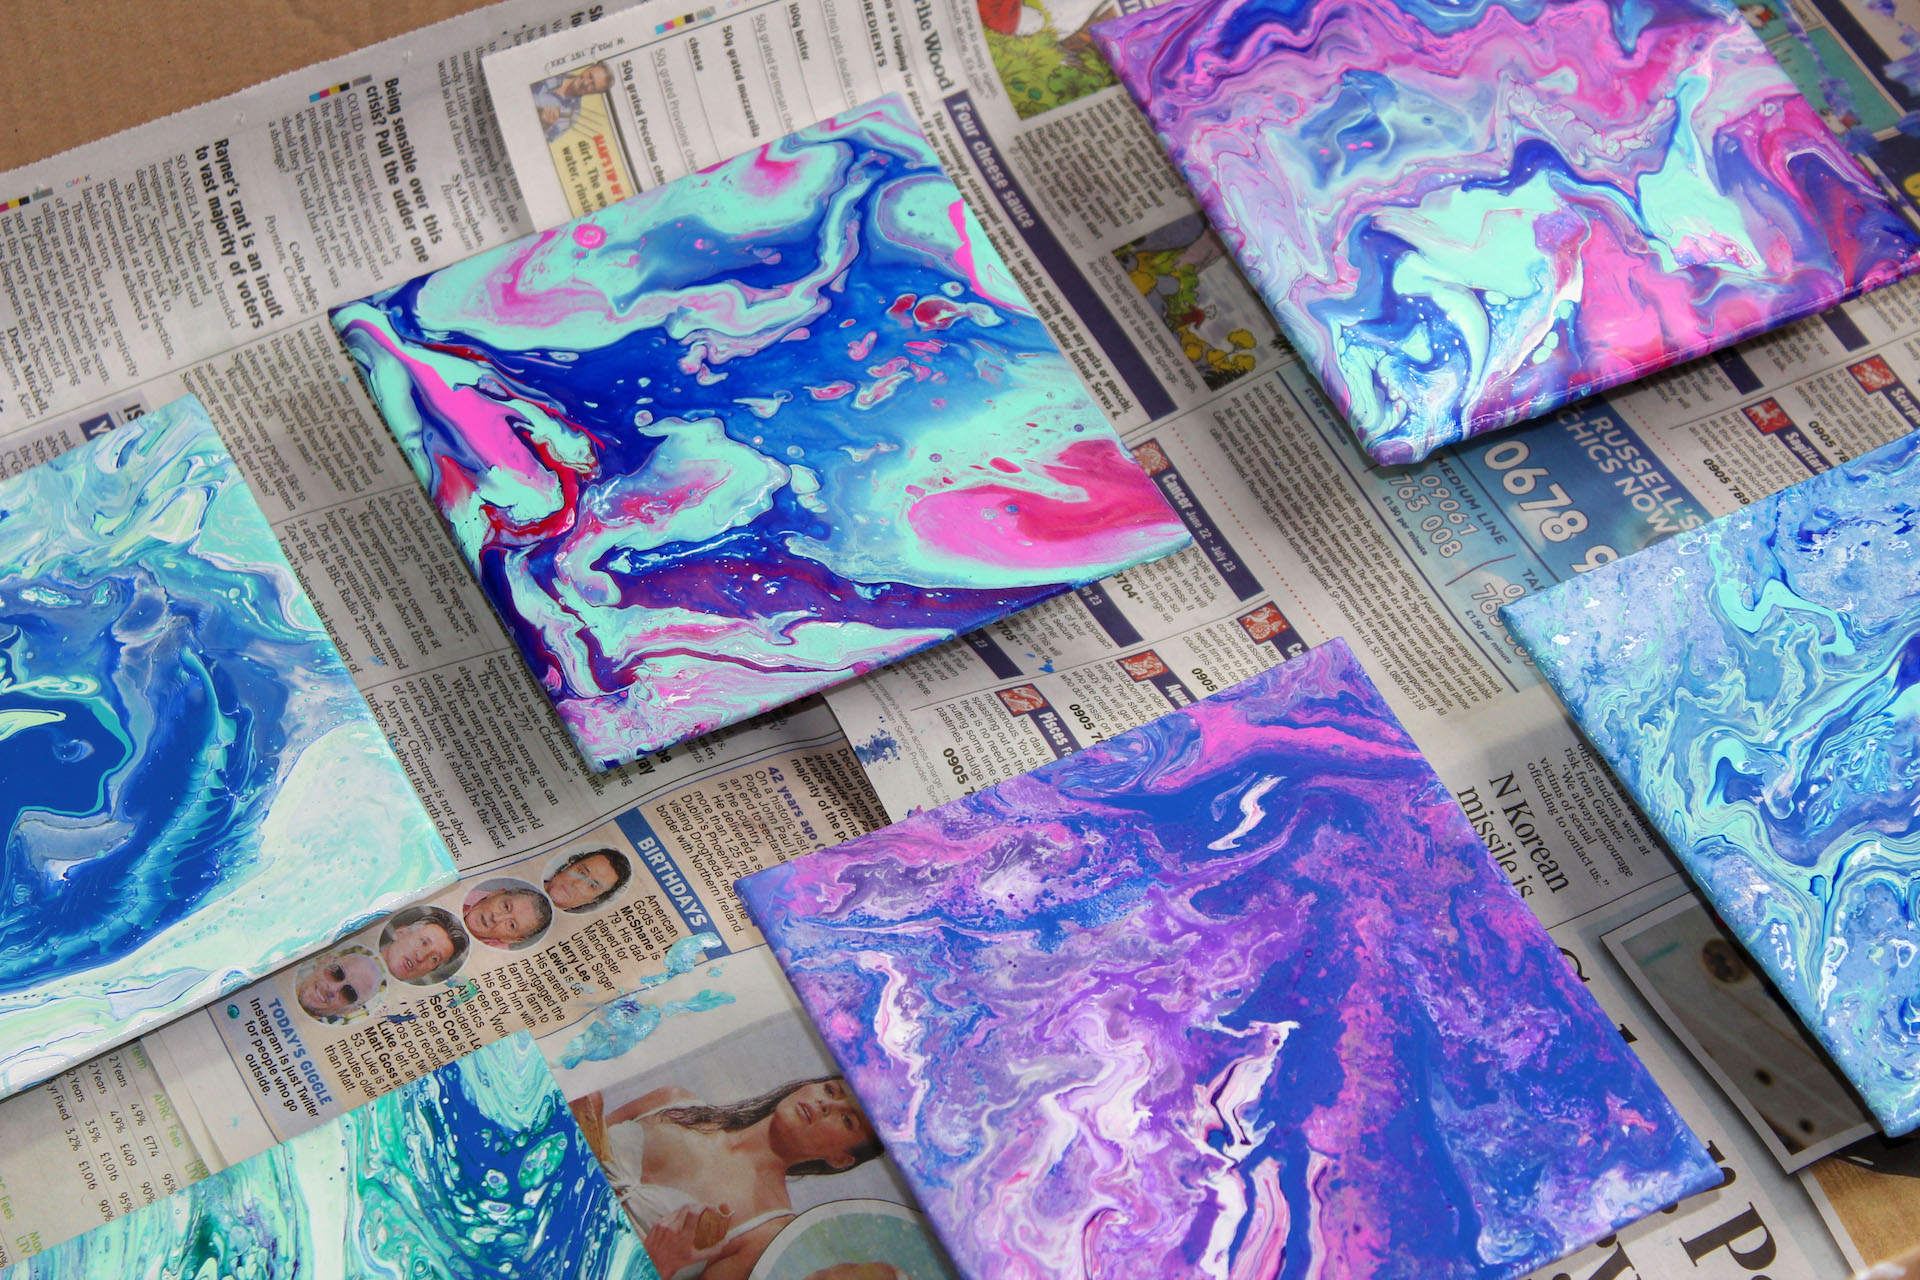 Acrylic pouring for beginners - leave to dry where it won't be disturbed